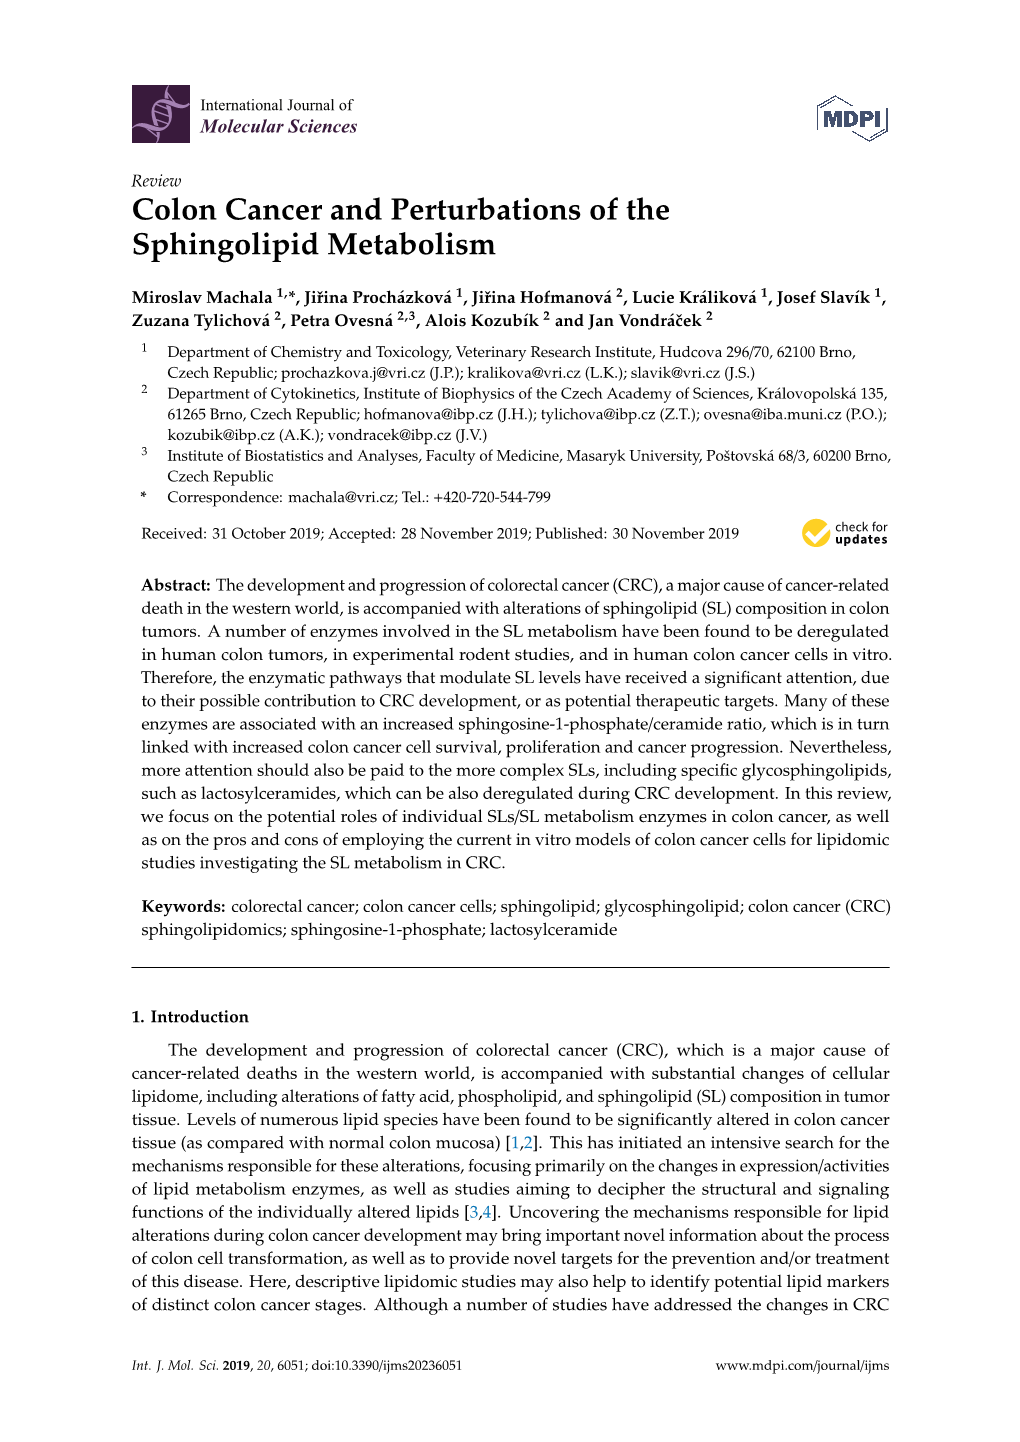 Colon Cancer and Perturbations of the Sphingolipid Metabolism